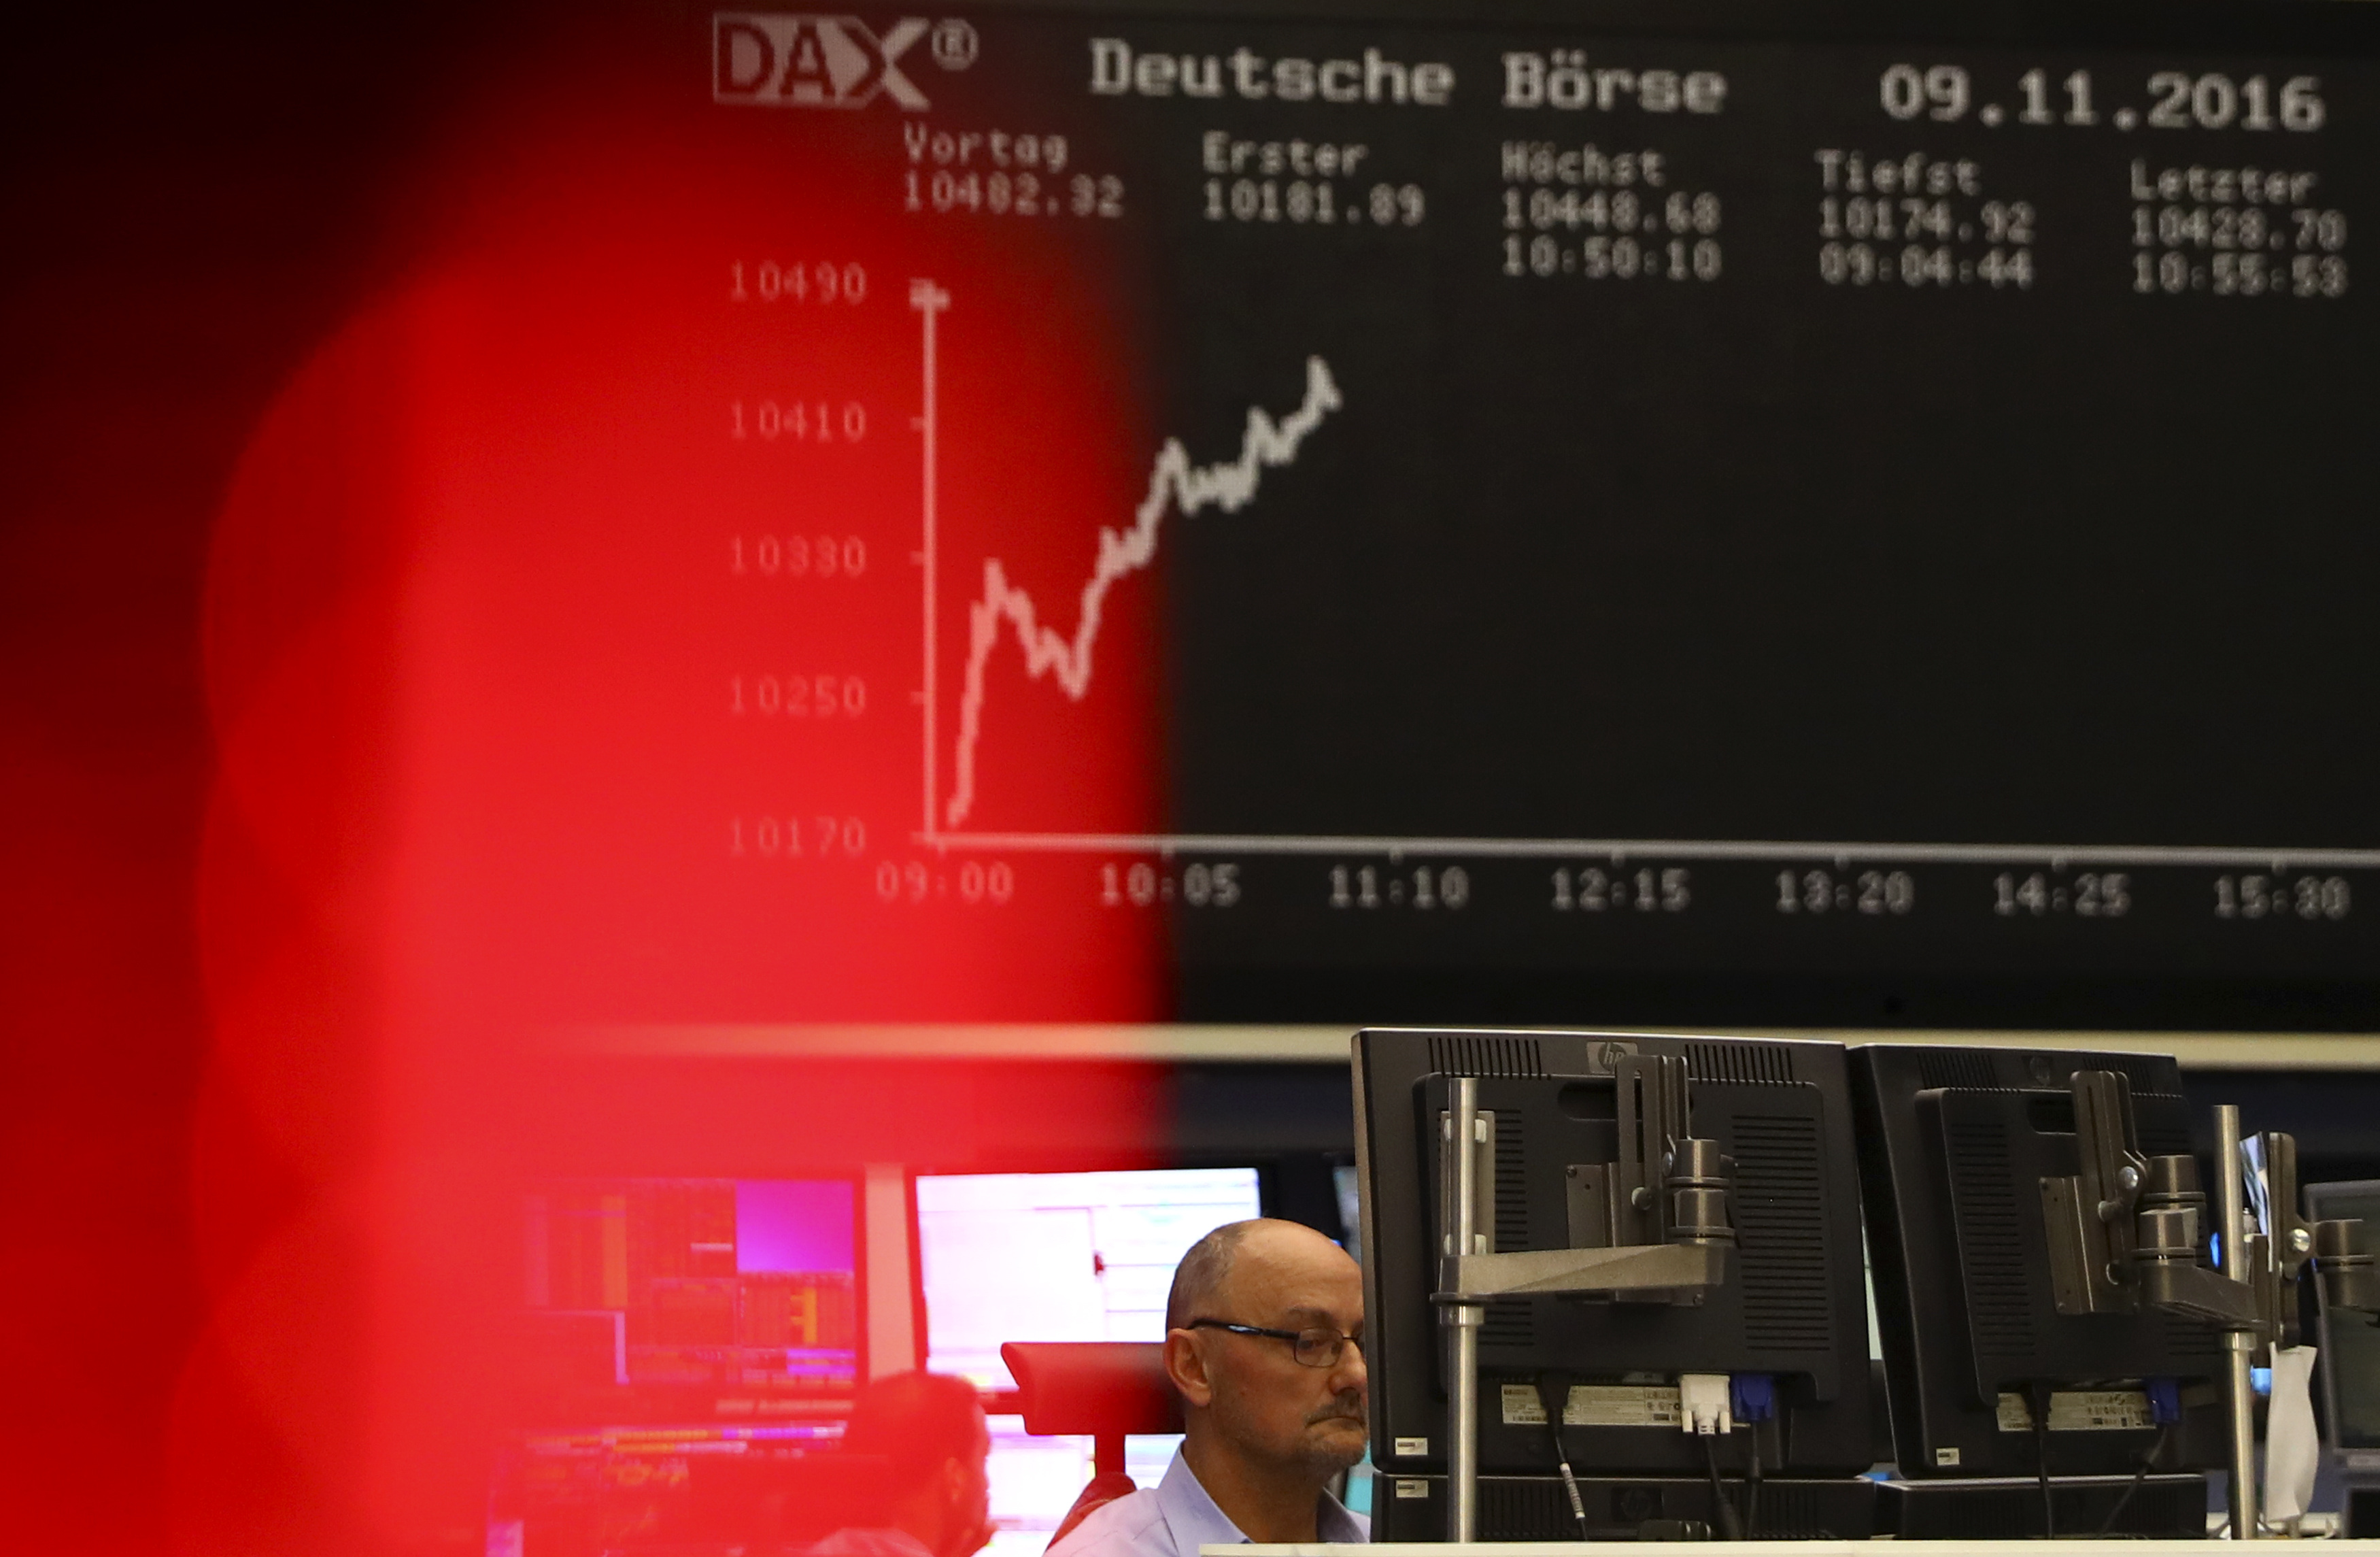 A trader at the Frankfurt stock exchange reacts in Frankfurt